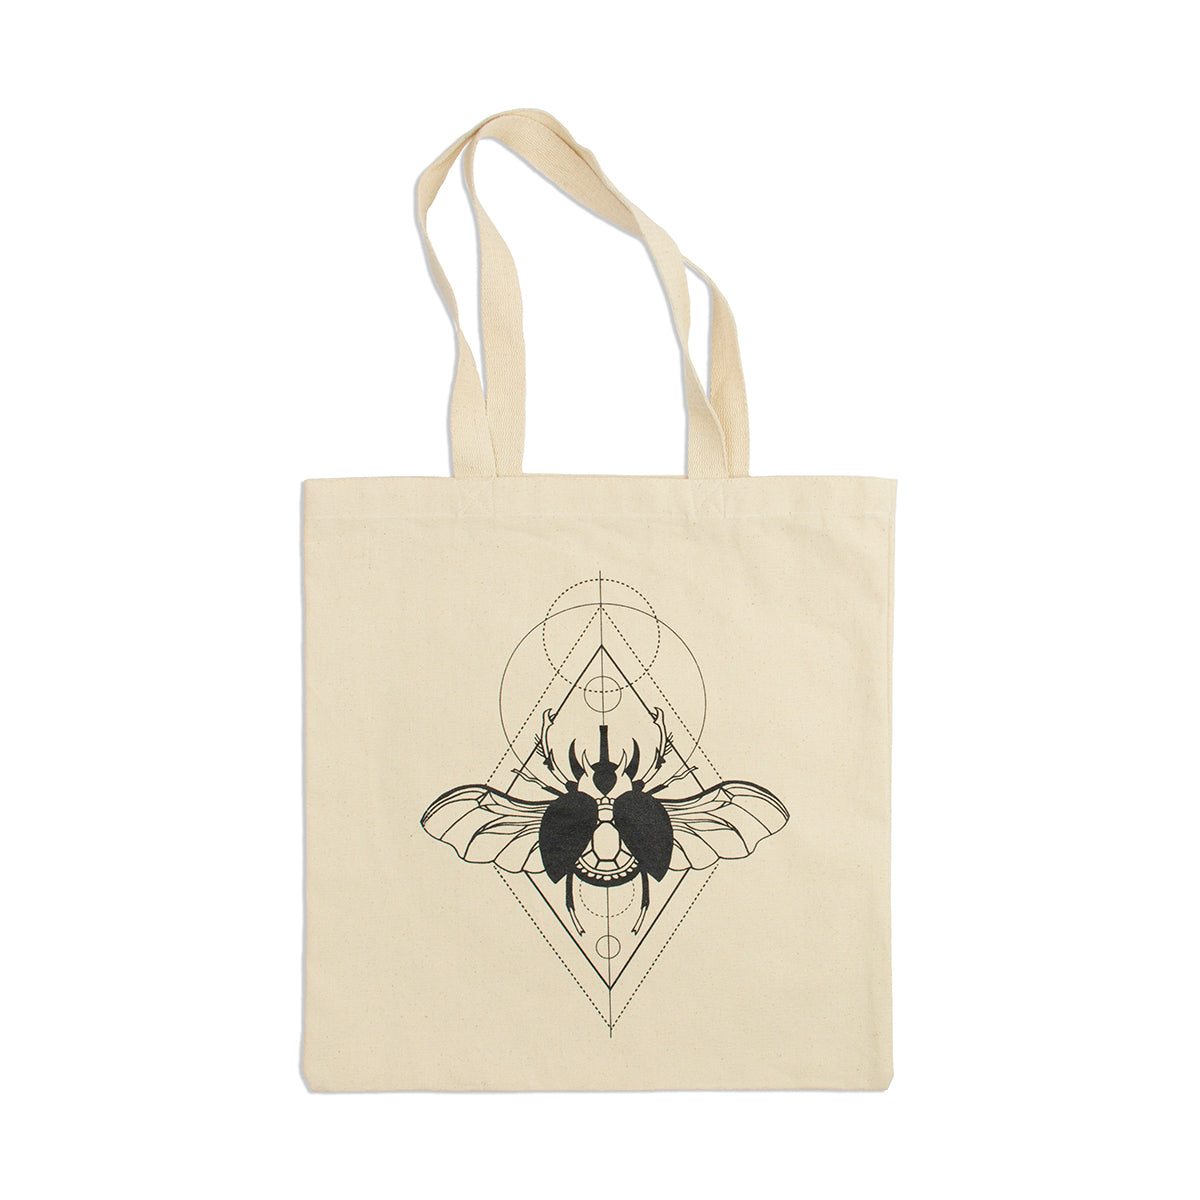 14 x 15" 100% cotton beige tote bag with geometric beetle illustration in the centre in black